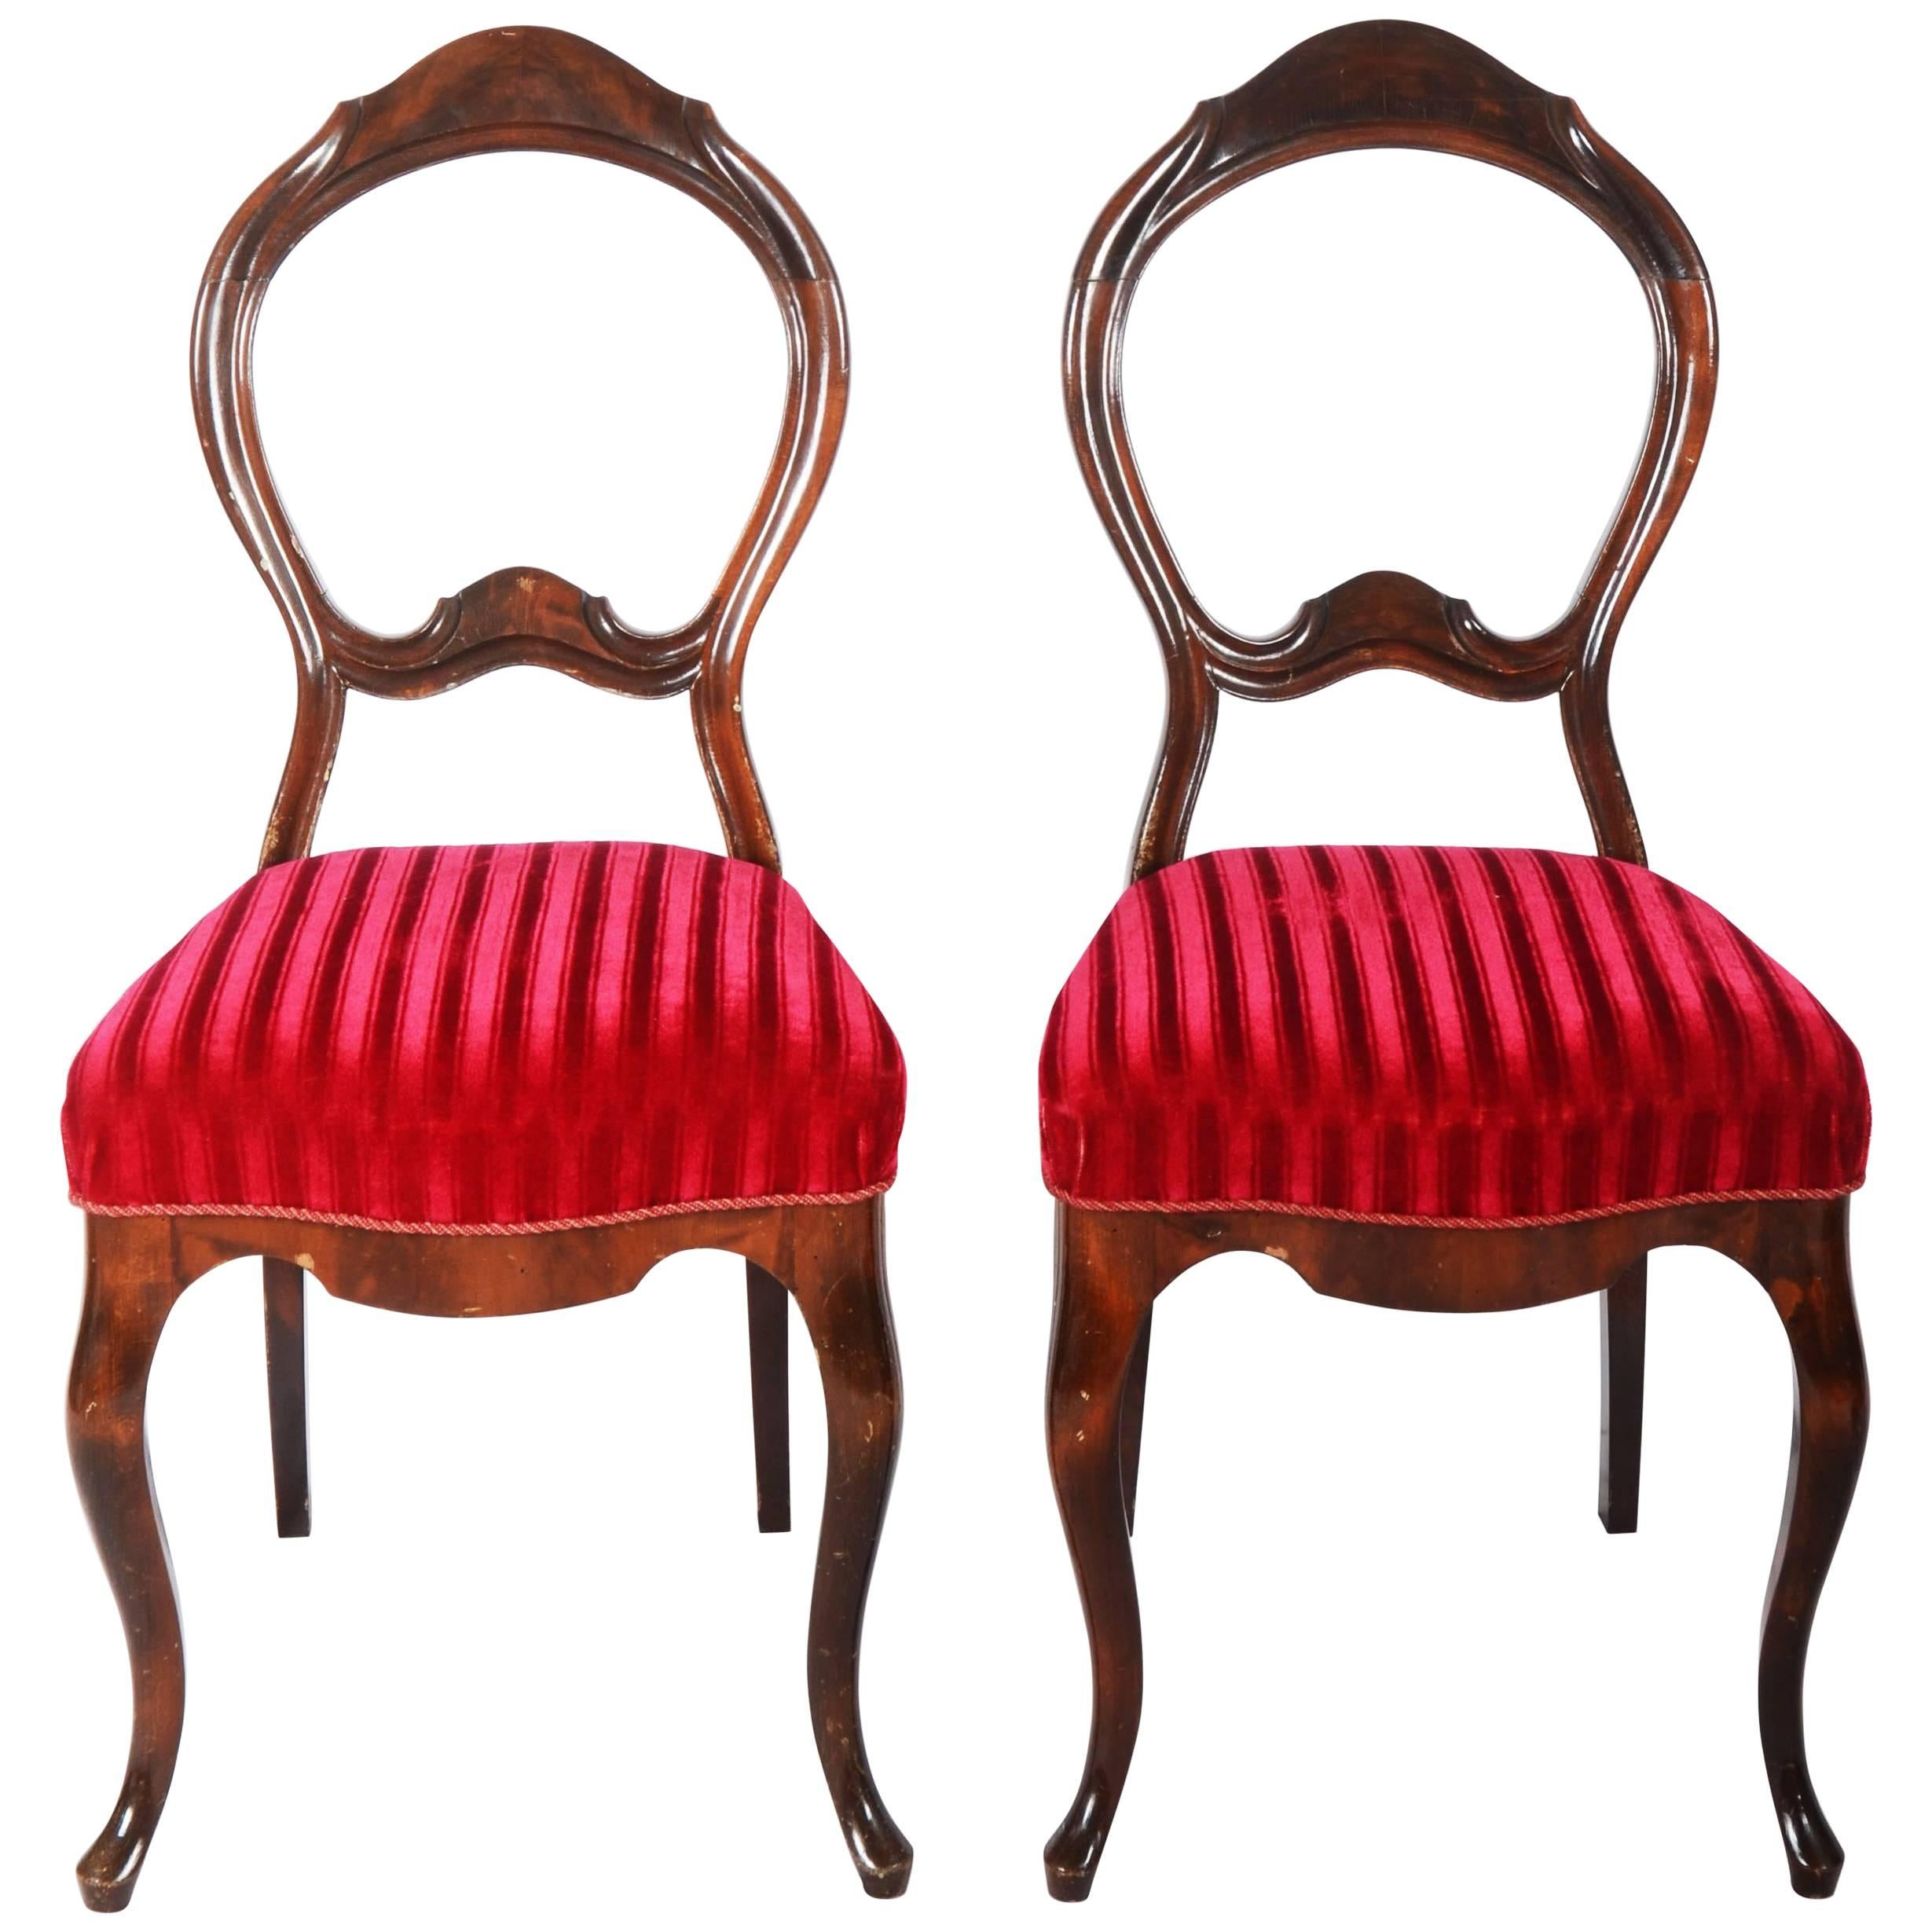 Pair of Mahogany Chairs Form 1850s For Sale